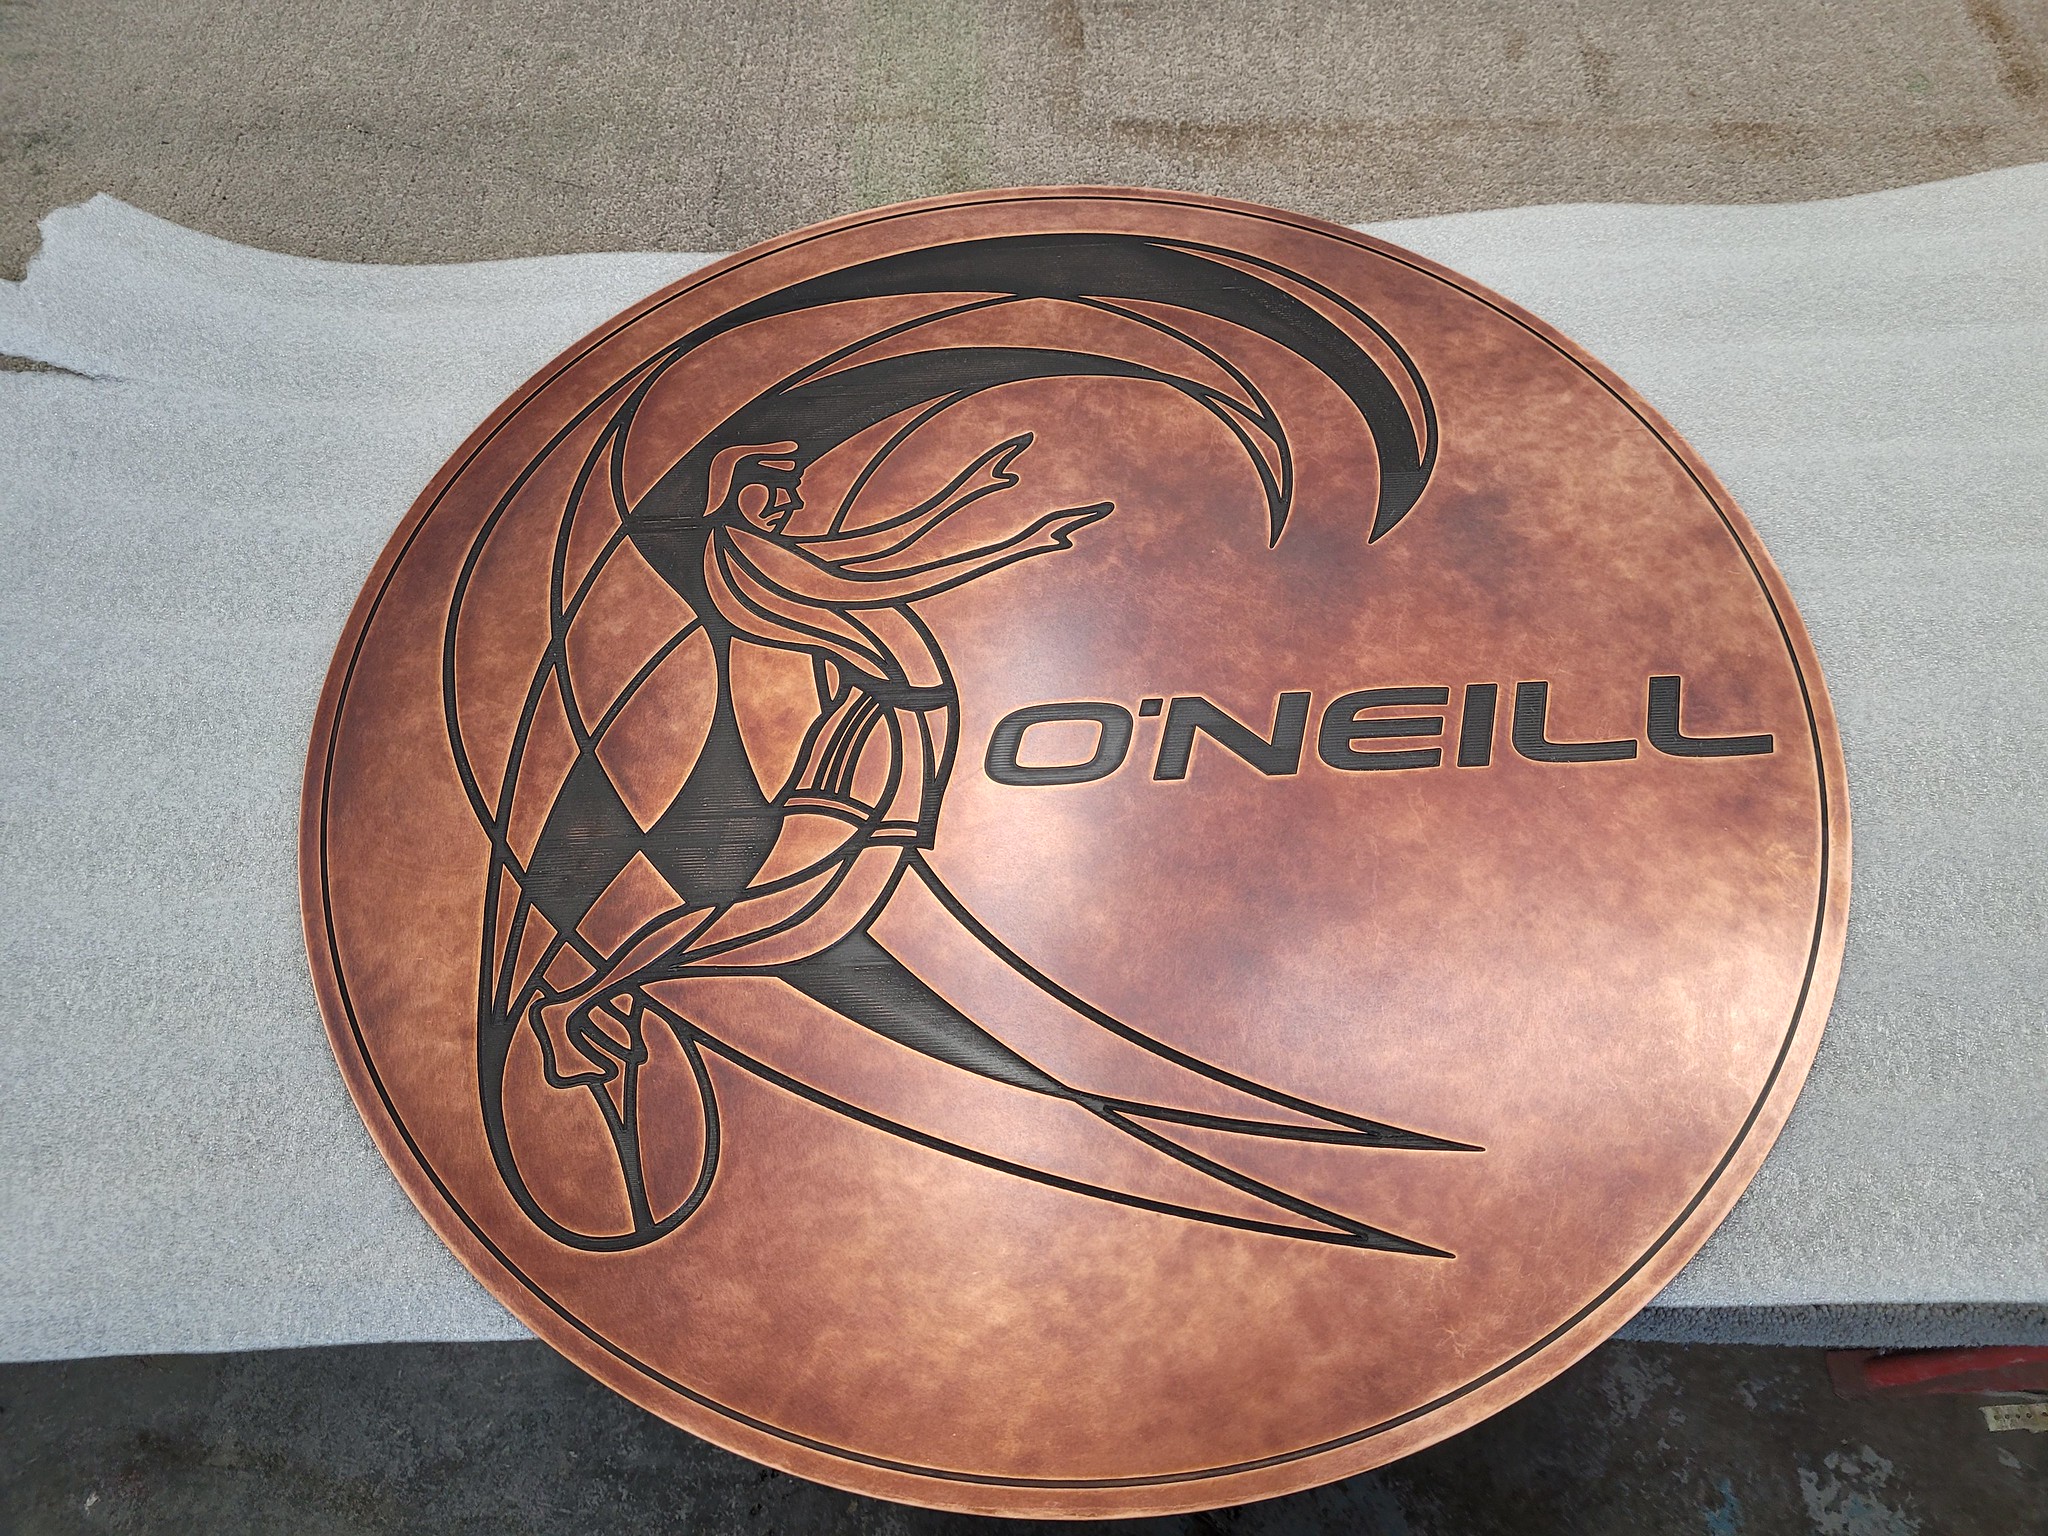 o'neill brass and copper signs